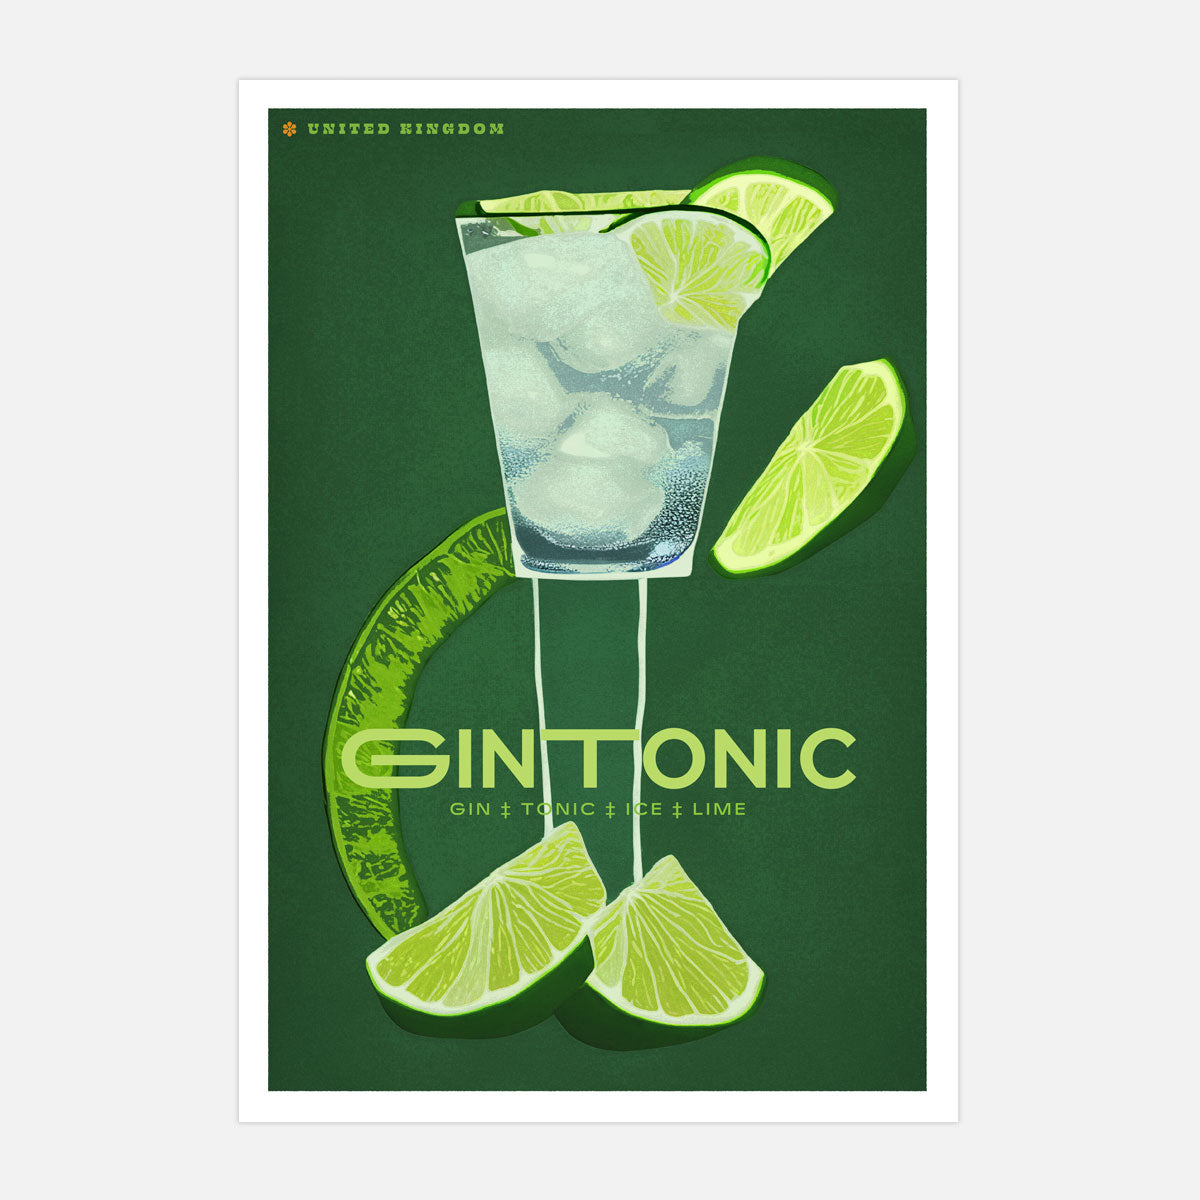 Gin Tonic United Kingdom retro vintage poster from Places We Luv